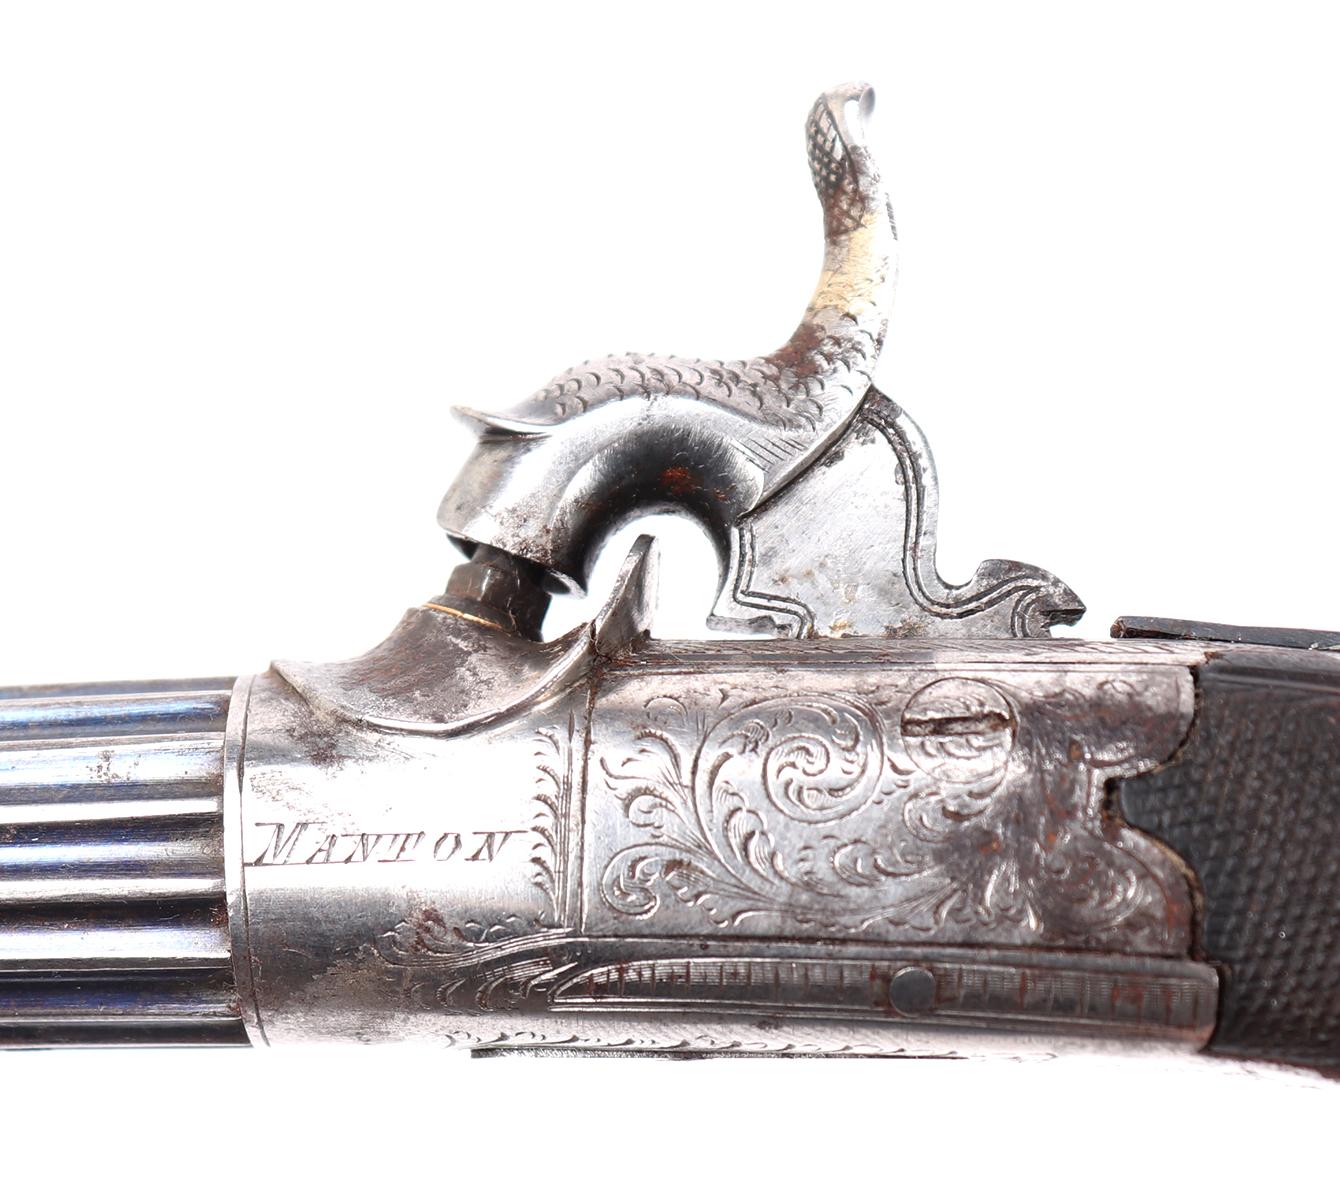 Excellent Pair of Silver, Fluted & Cased London Pistols by Manton